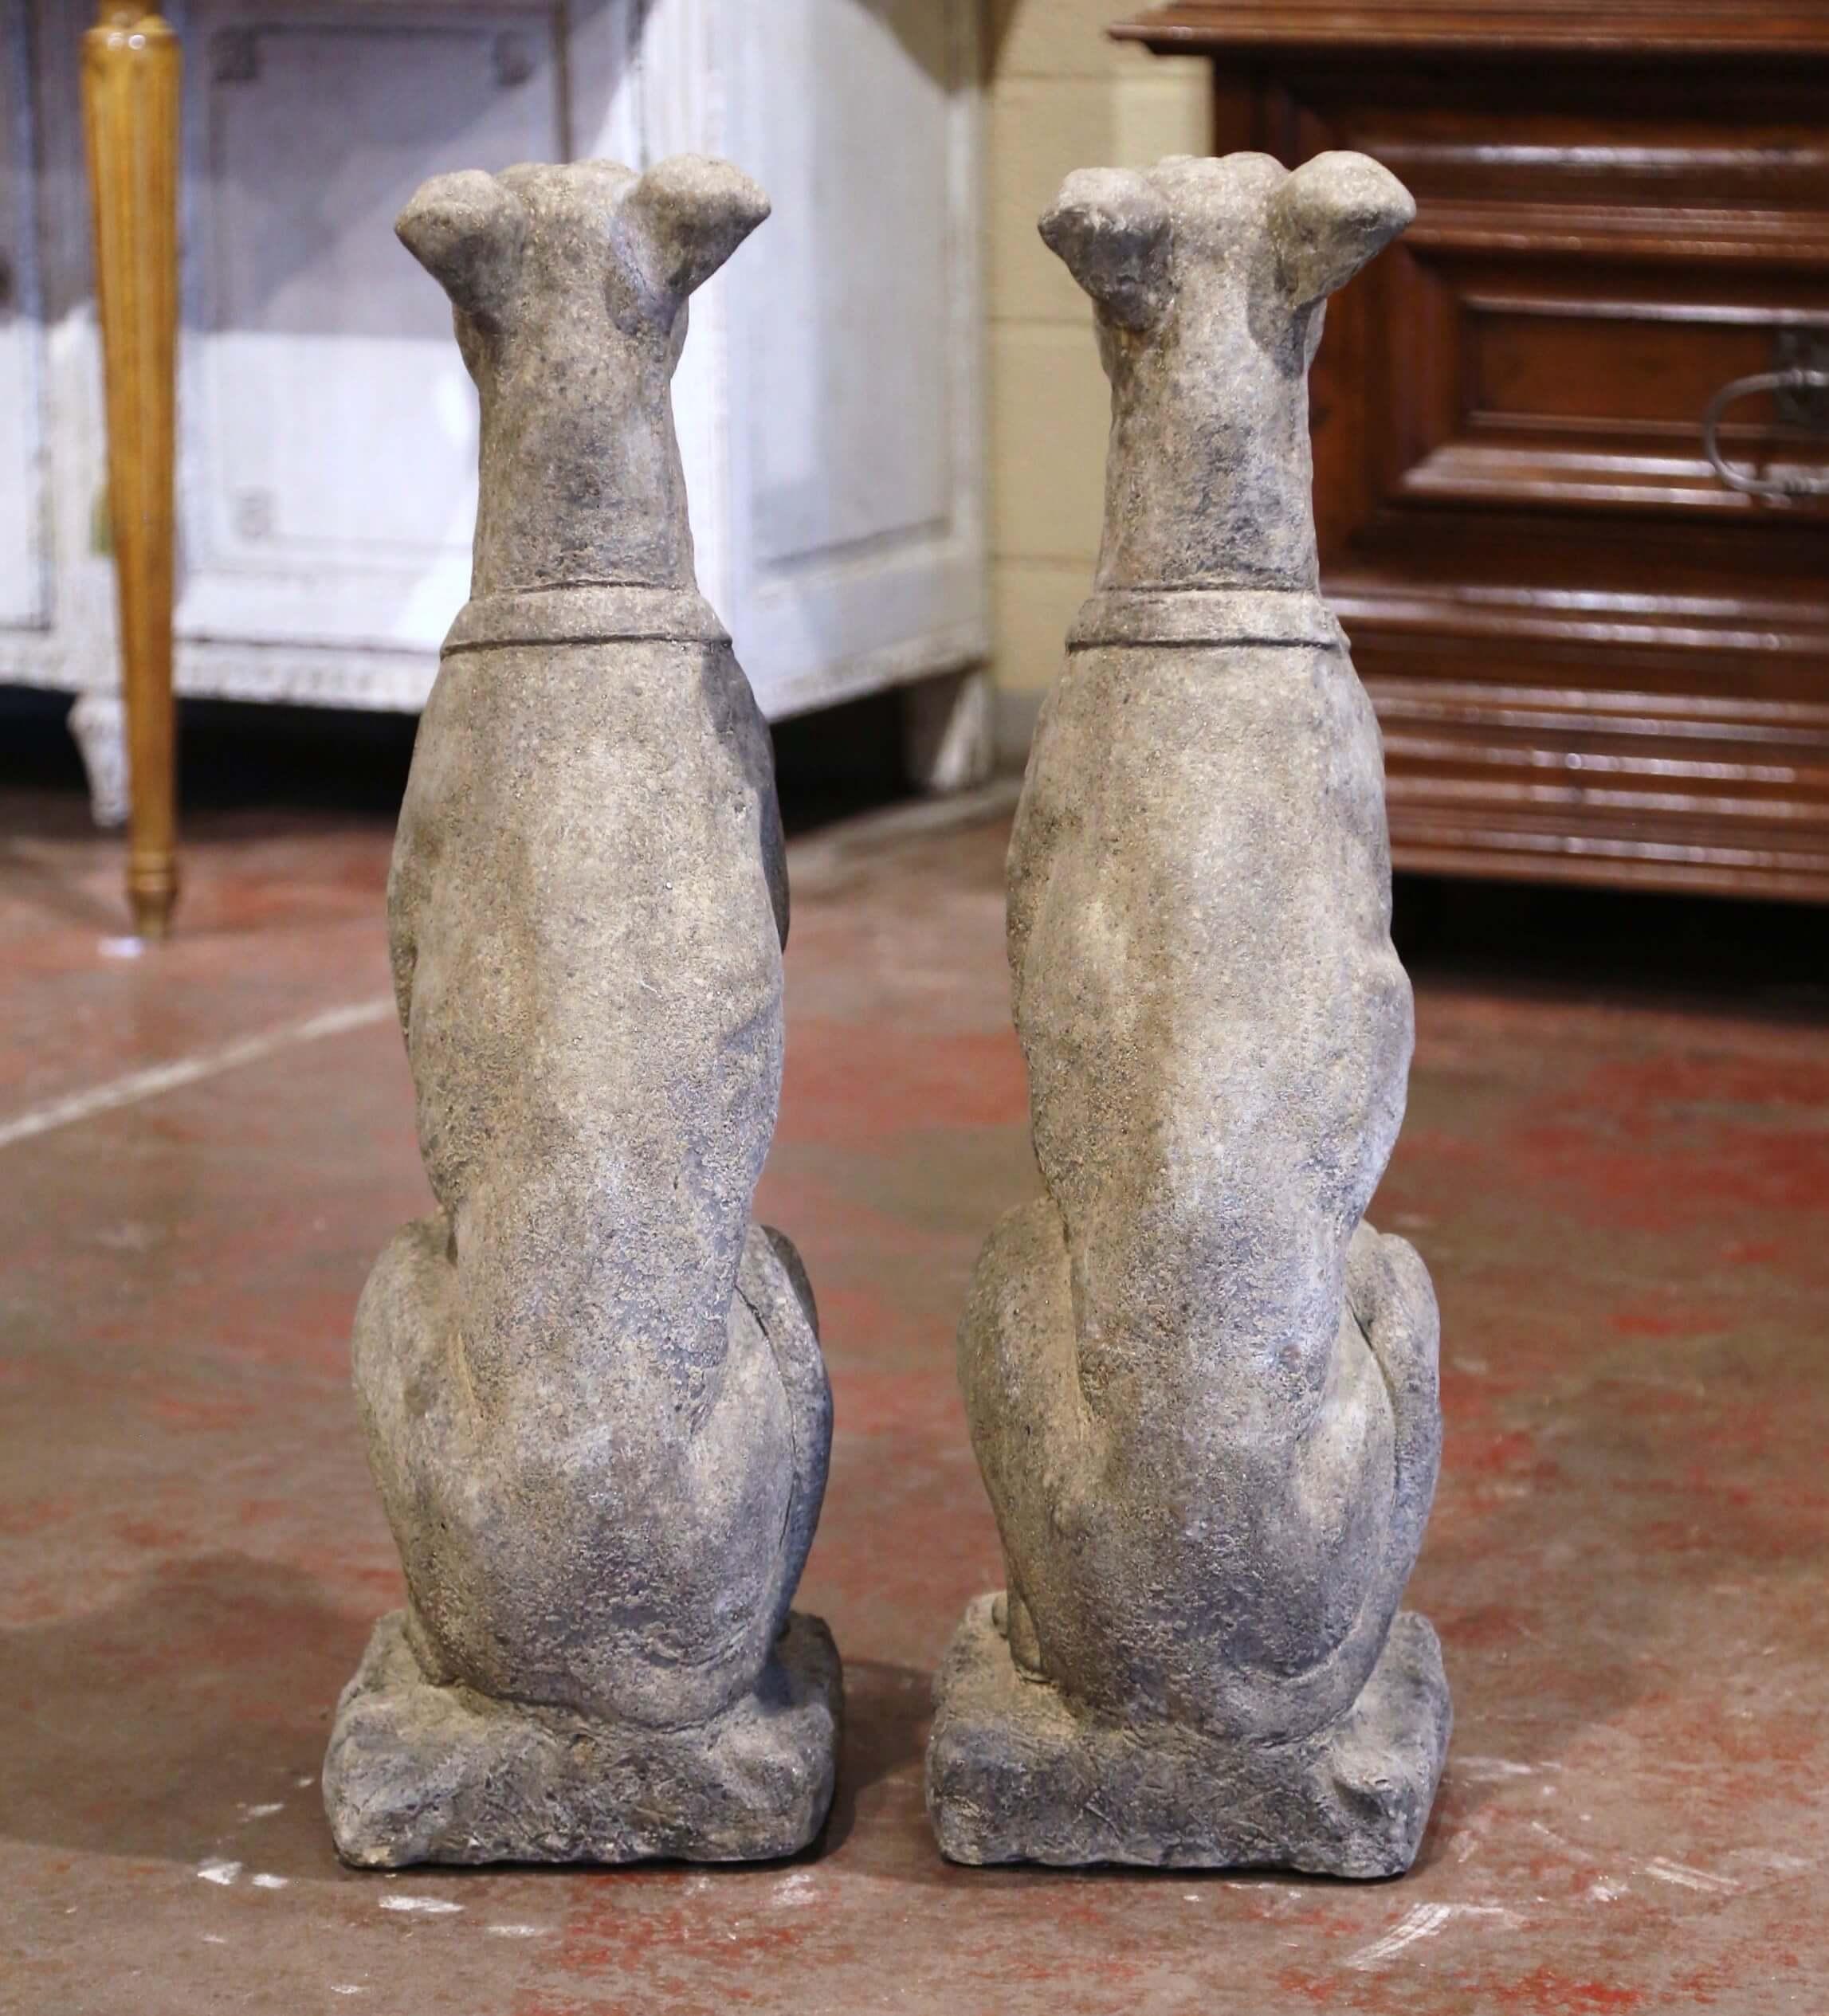 Pair of Vintage Italian Outdoor Weathered Carved Stone Greyhound Dog Sculptures 1